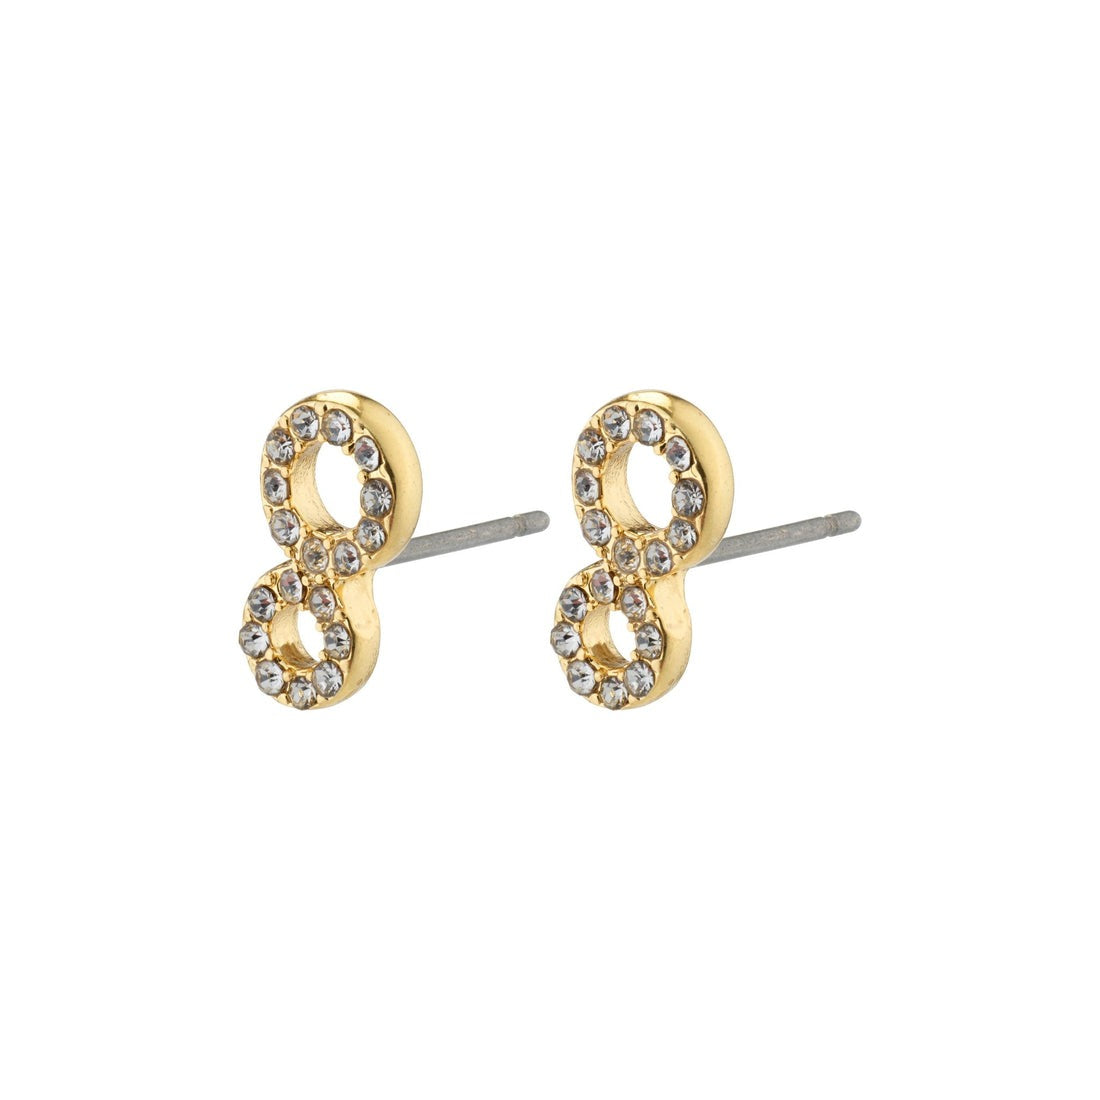 ROGUE recycled Crystal Earrings Gold Plated